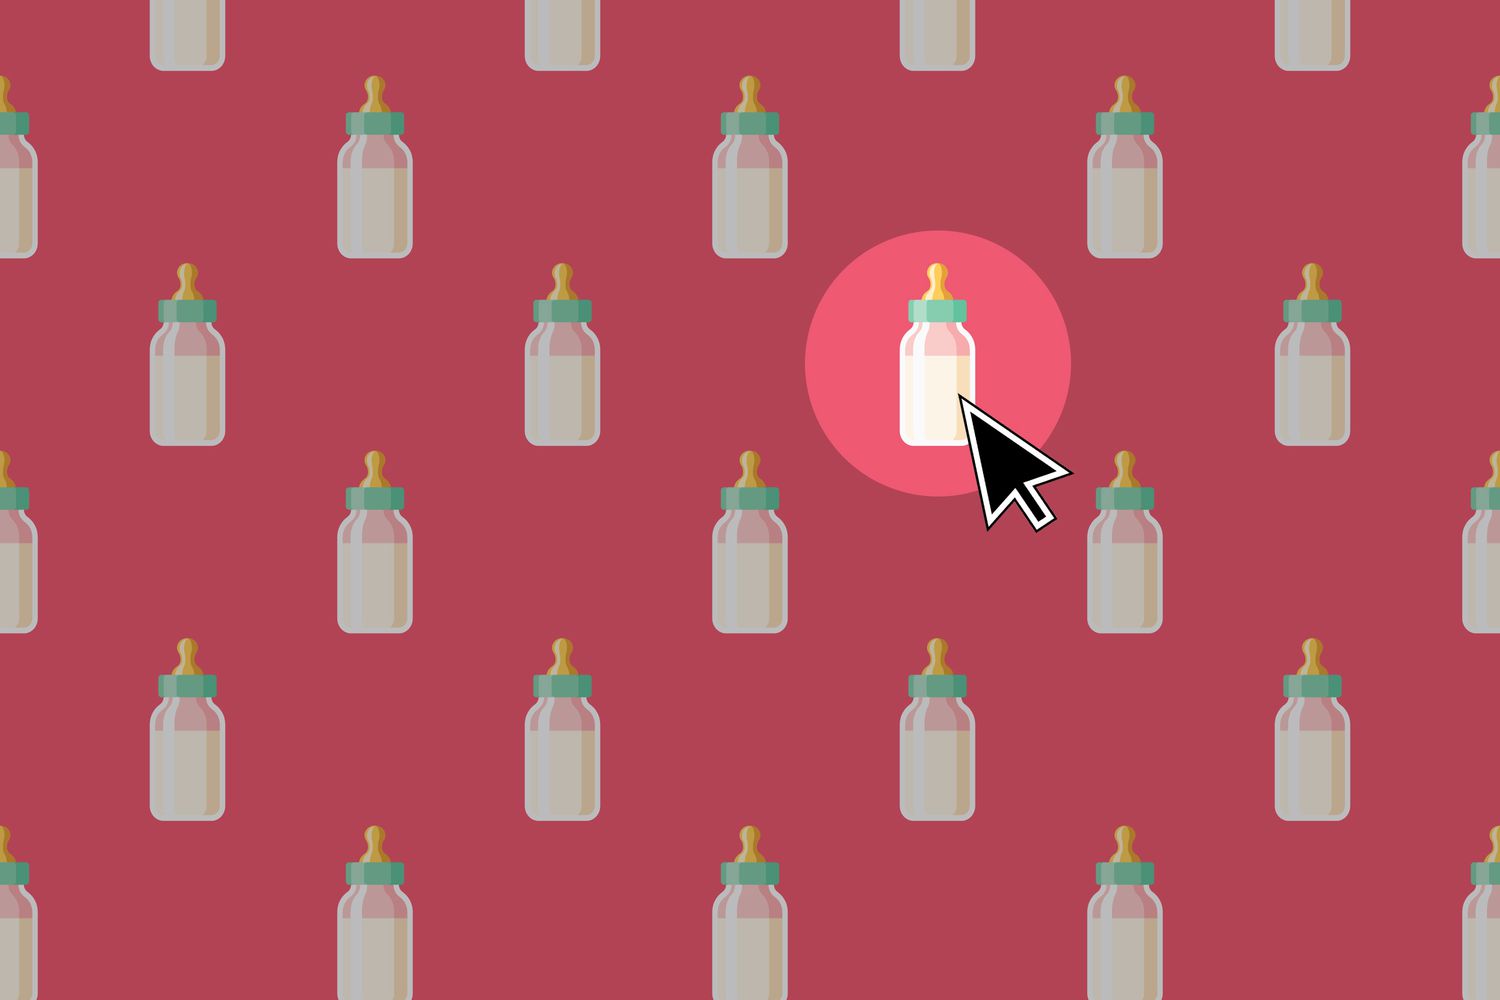 field of baby bottle icons with a cursor on top of one